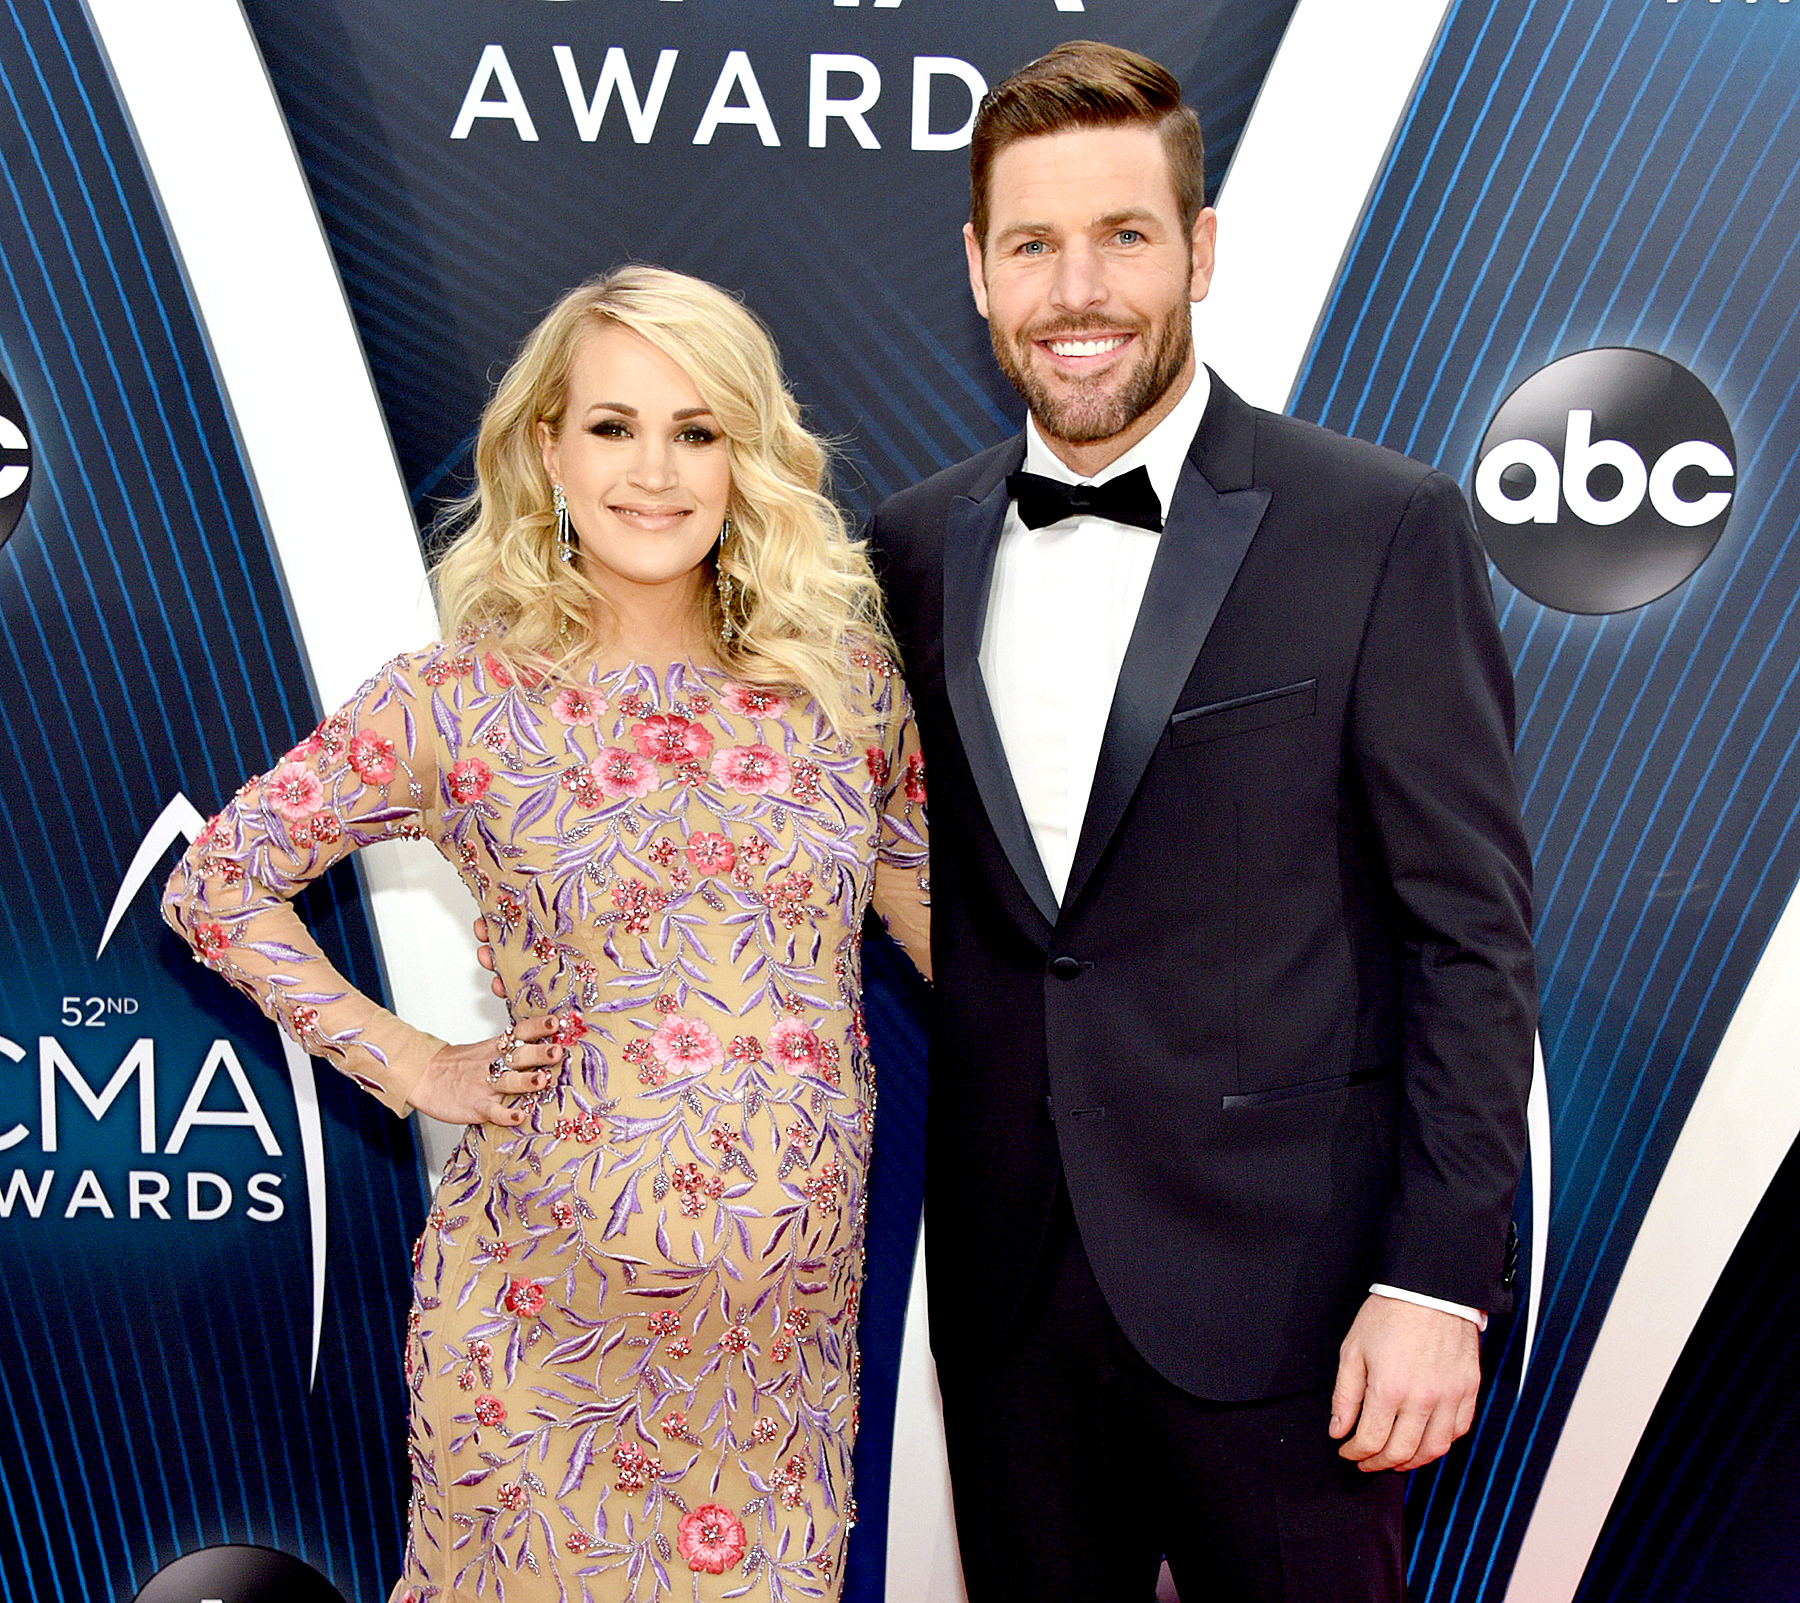 Carrie Underwood's Fashion Will Be Fabulous Not Comfortable on To